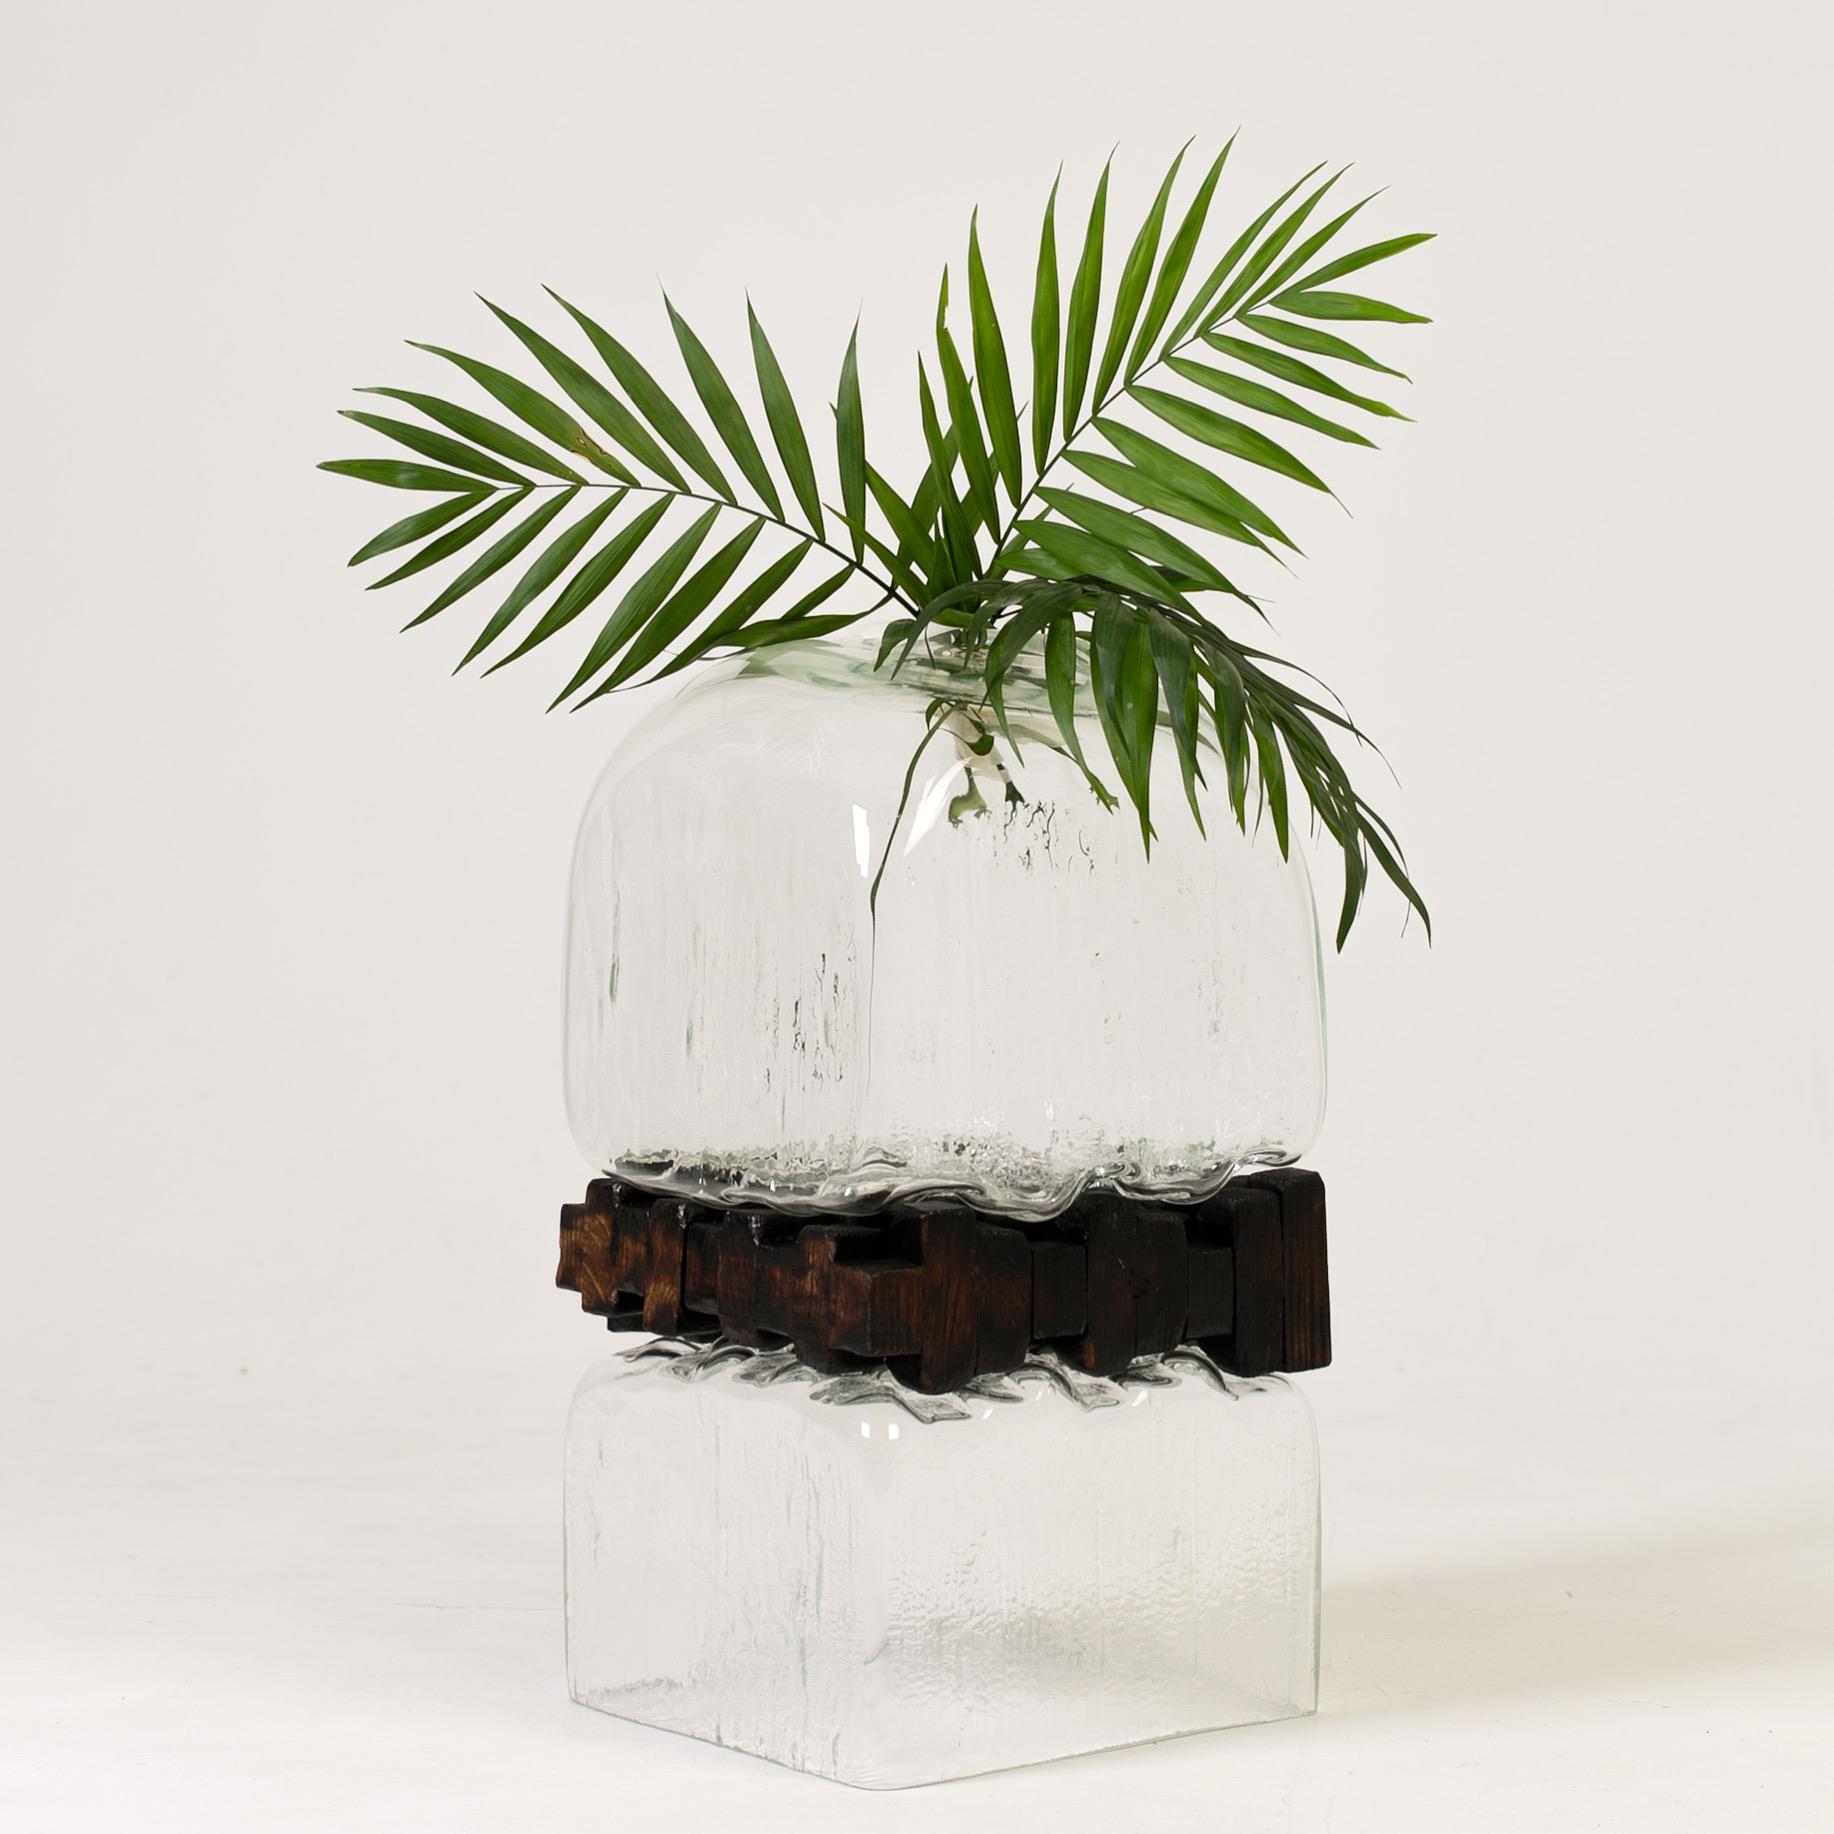 Pixel vase by Alexey Drozhdin
Dimensions: D 25 x W 25 x H 65 cm. 
Materials: Glass, Oak shape.

A young designer and artist Alexey Drozhdin creates extraordinary decorative glass objects. the designer became a finalist of the MilanoVetro-35